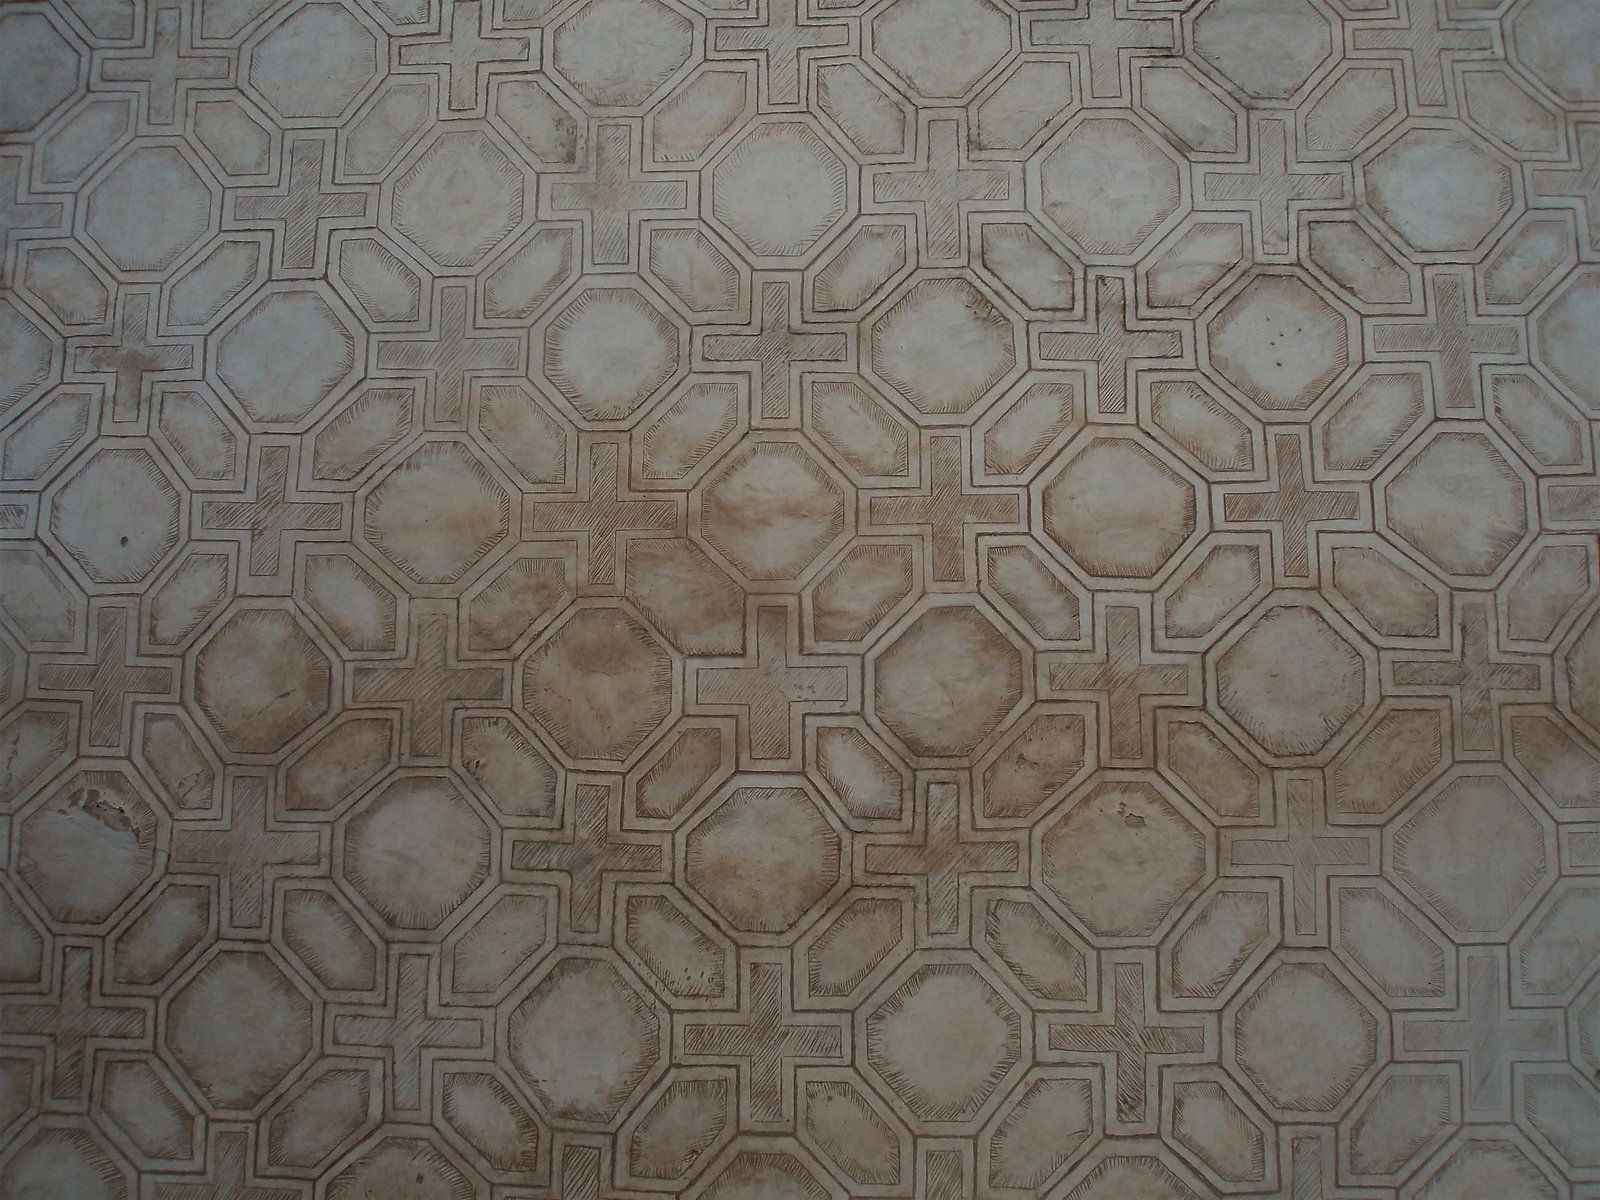 a cement tile design, with square shapes